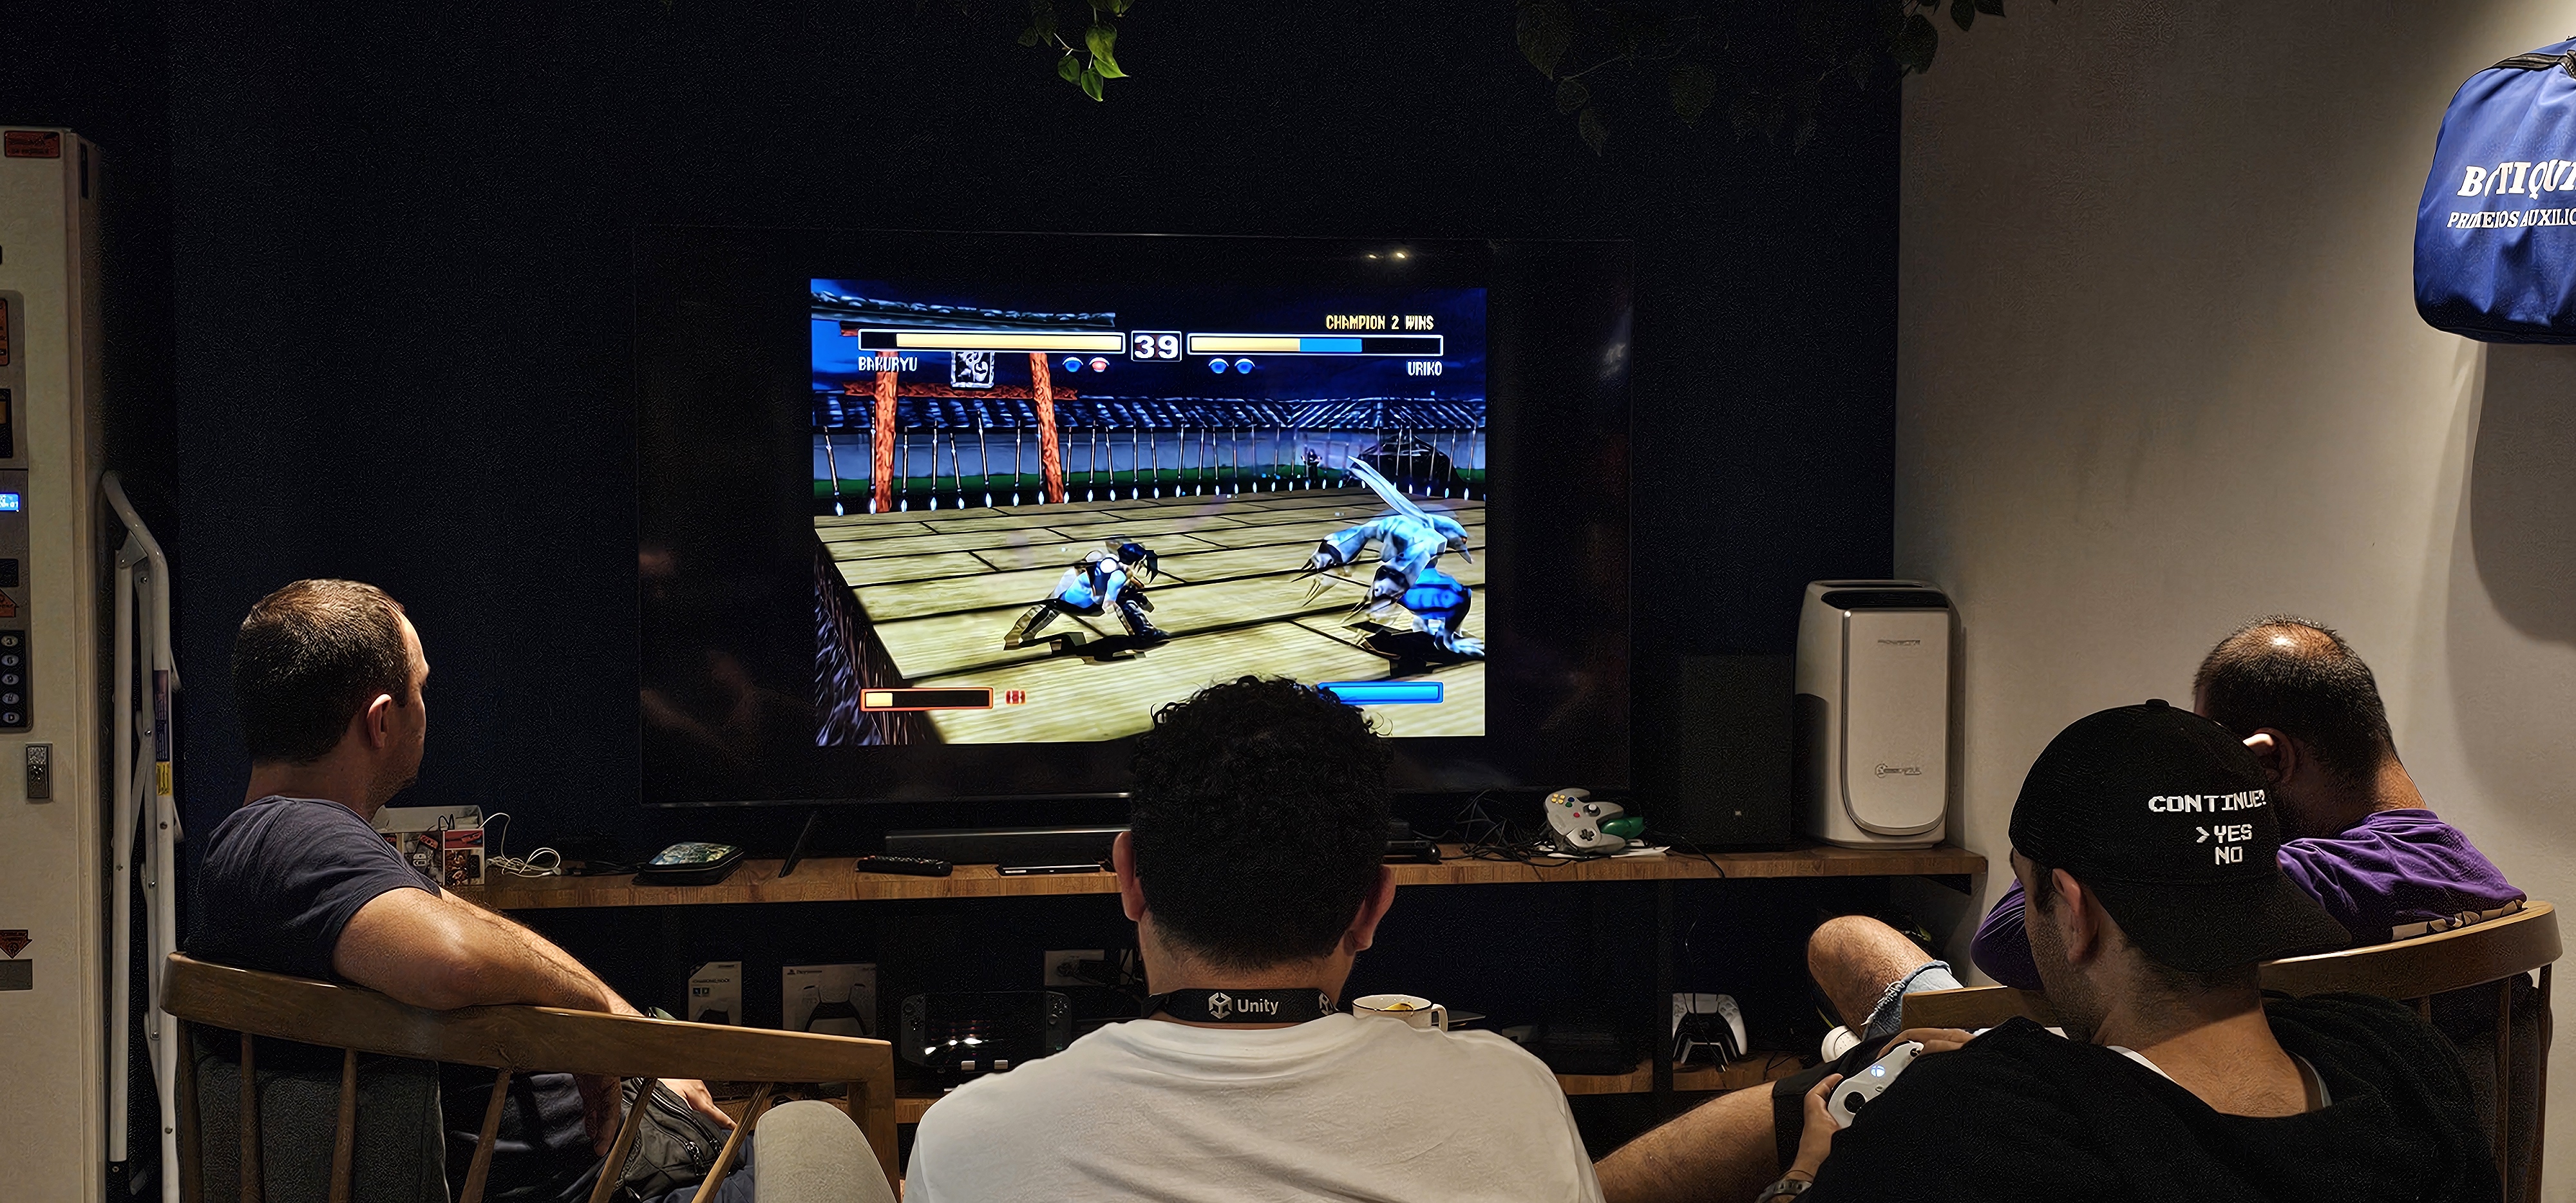 Picture of a group of dudes playing fighting games in front of a TV.